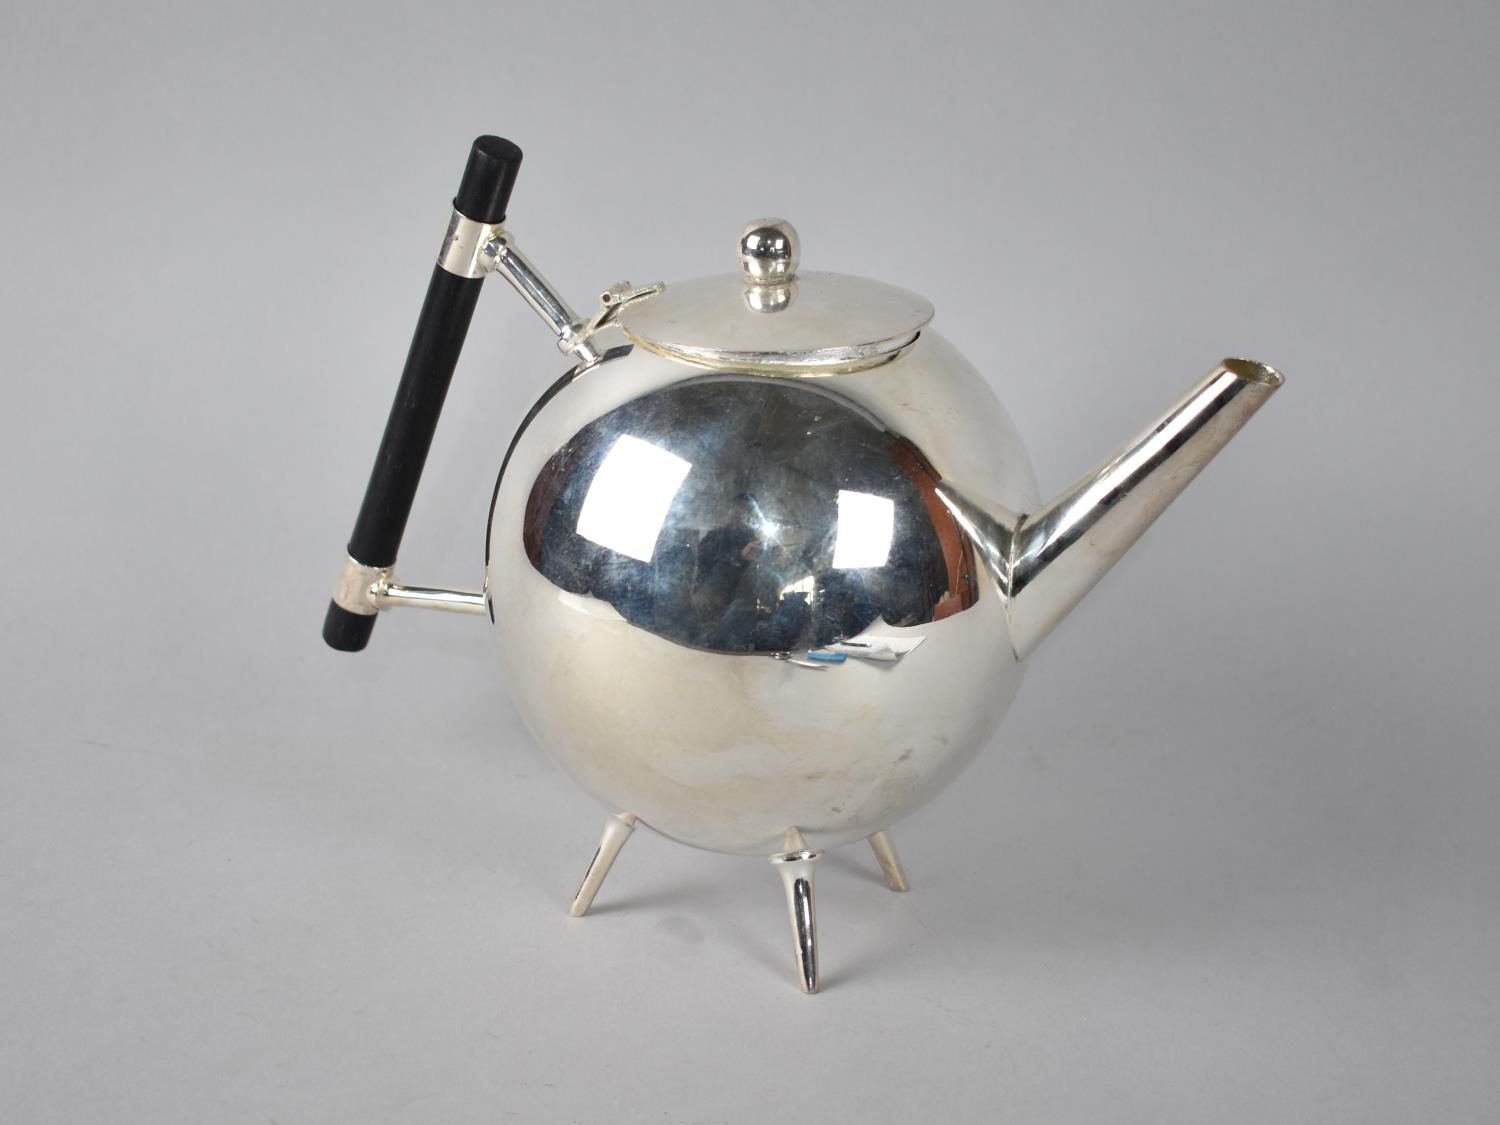 A Reproduction Silver Plated Dresser Style Globular Teapot with Ebonized Wooden handle, 18cms High